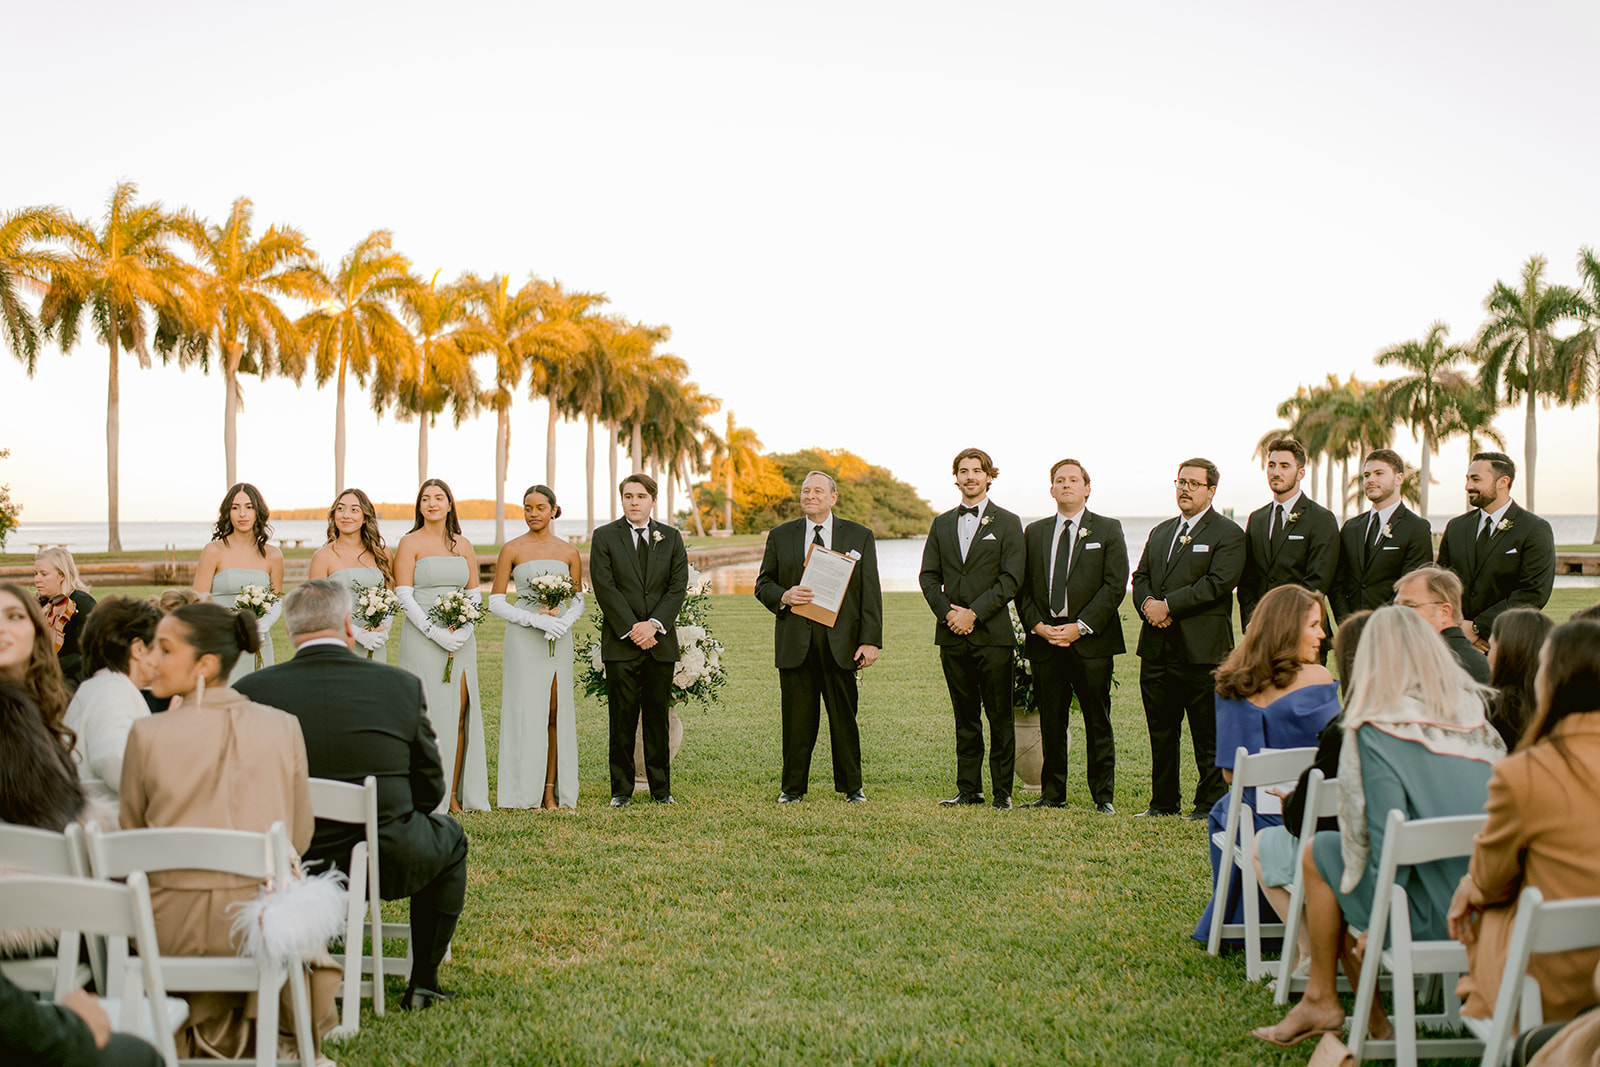 Stunning images from Bales & Shelby's Deering Estate Wedding in Miami Florida
